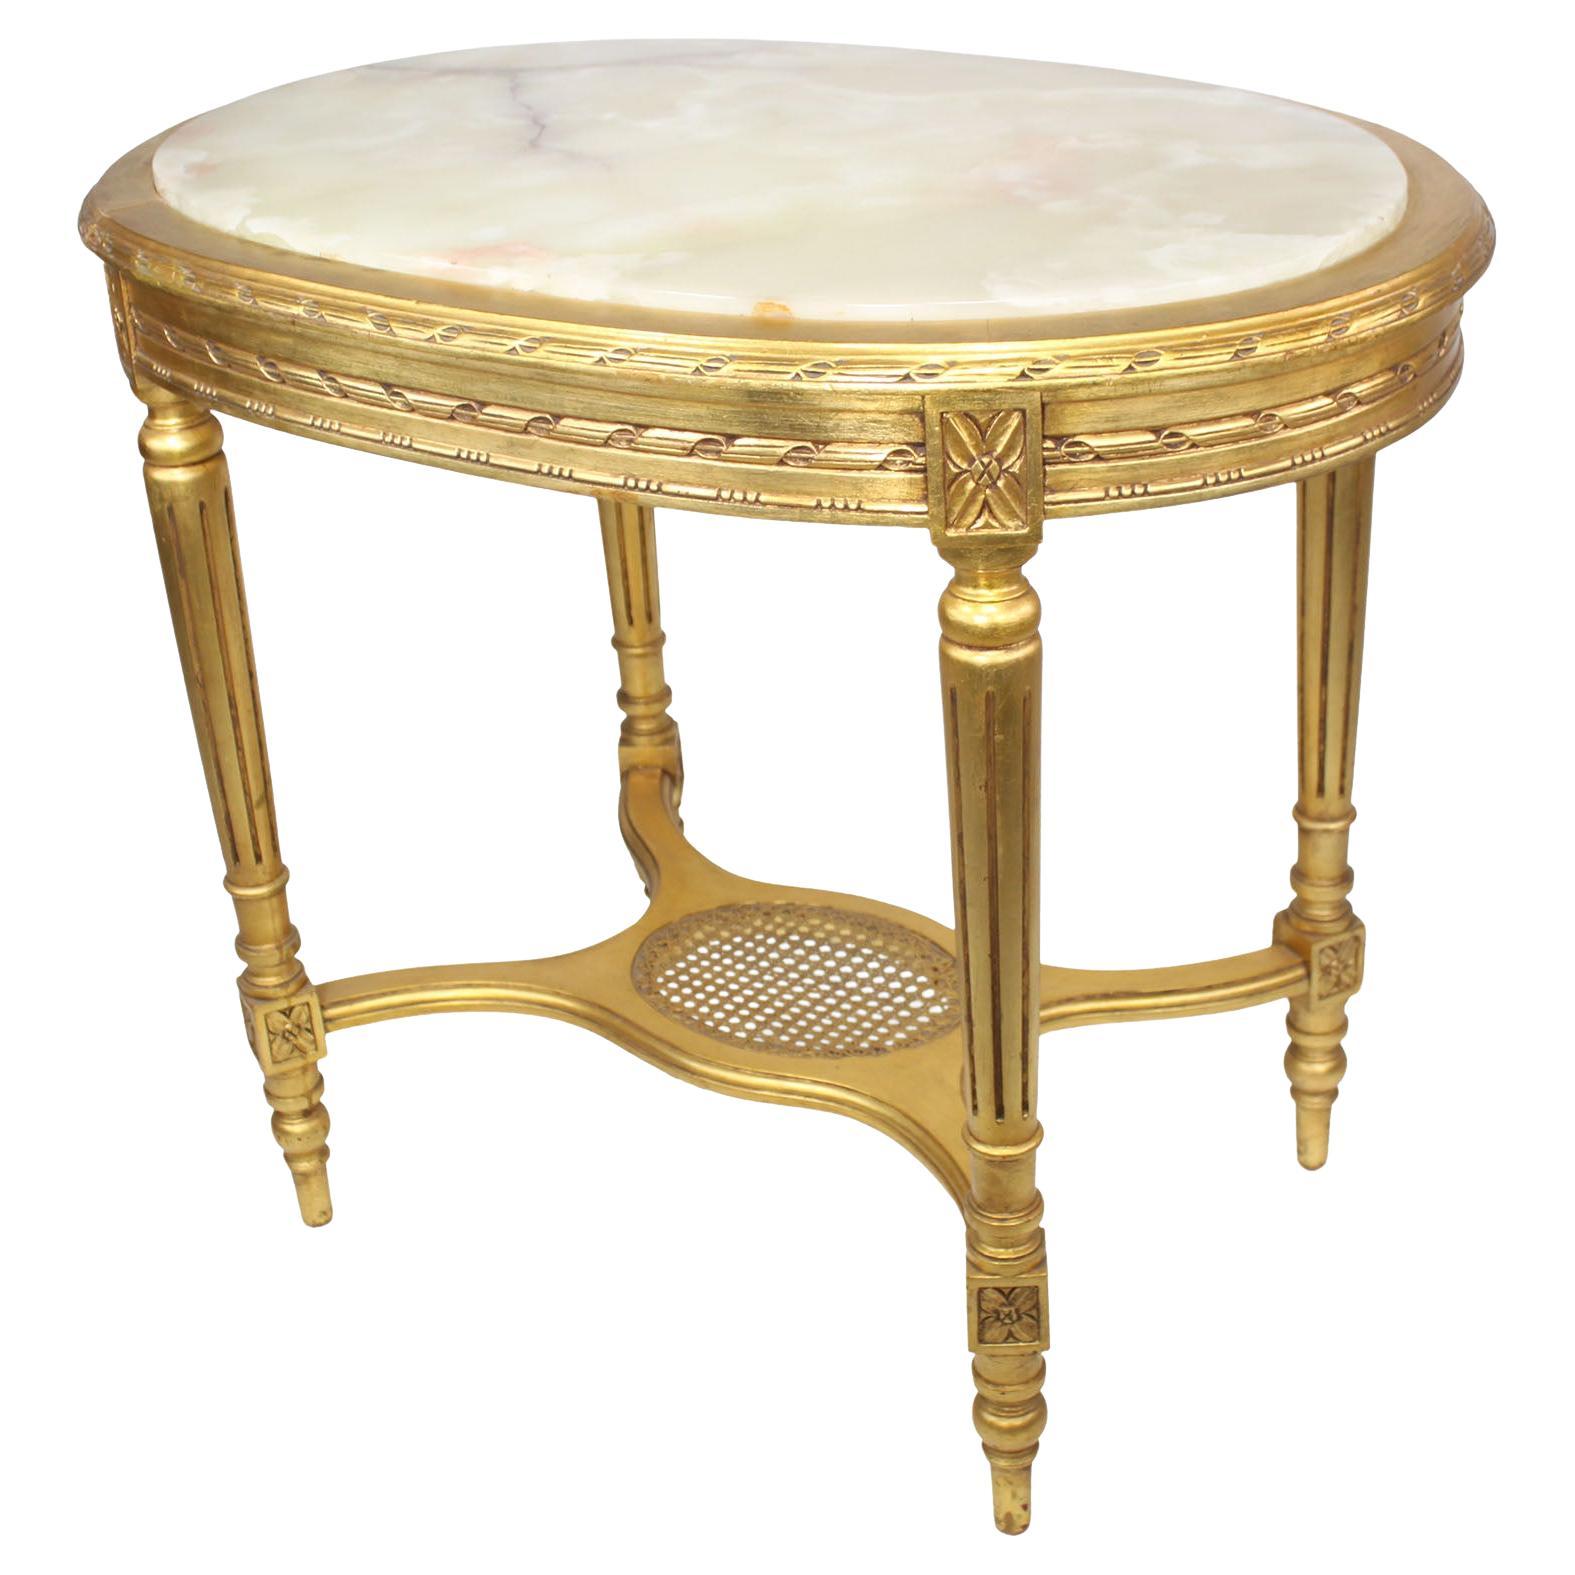 French Louis XVI Style Belle Époque Oval Giltwood Carved Center Table w/Onyx Top